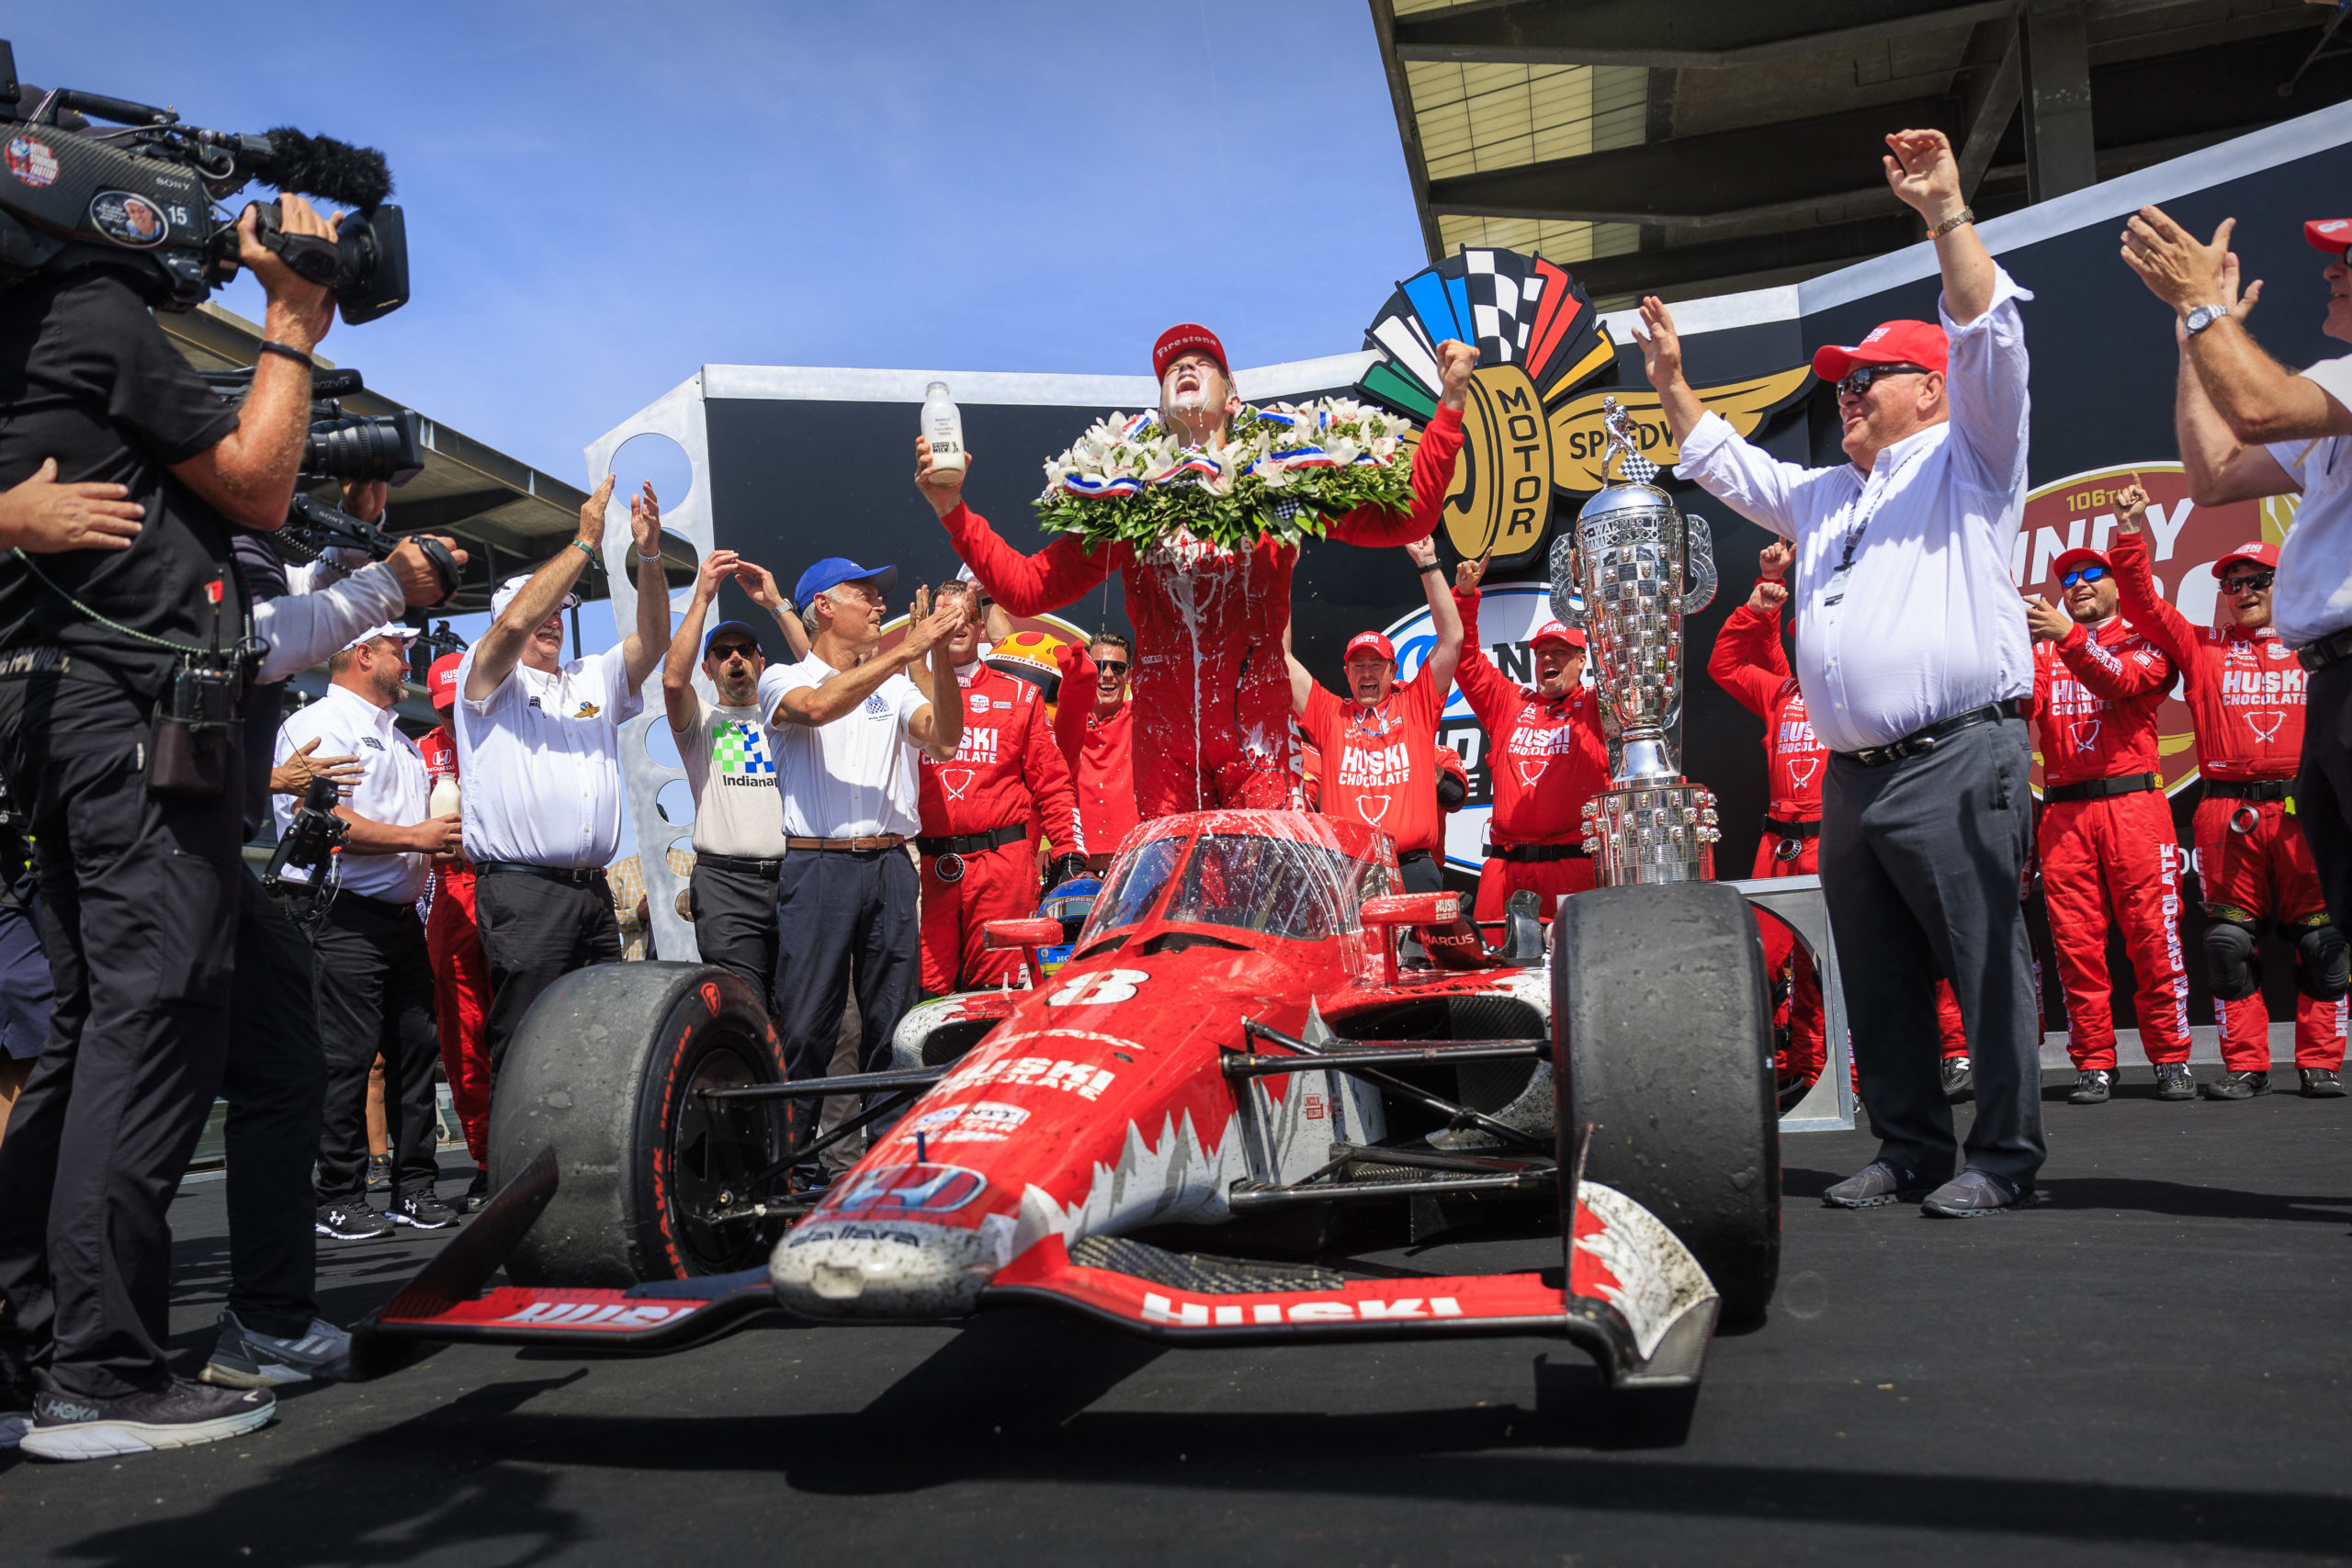 May 29, 2022; Indianapolis, Indiana, USA; Chip Ganassi Racing driver Marcus Ericsson (8) of Sweden celebrates in victory lane with milk after he wins the 106th Indianapolis 500 at Indianapolis Motor Speedway. Mandatory Credit: Mark J. Rebilas-USA TODAY Sports